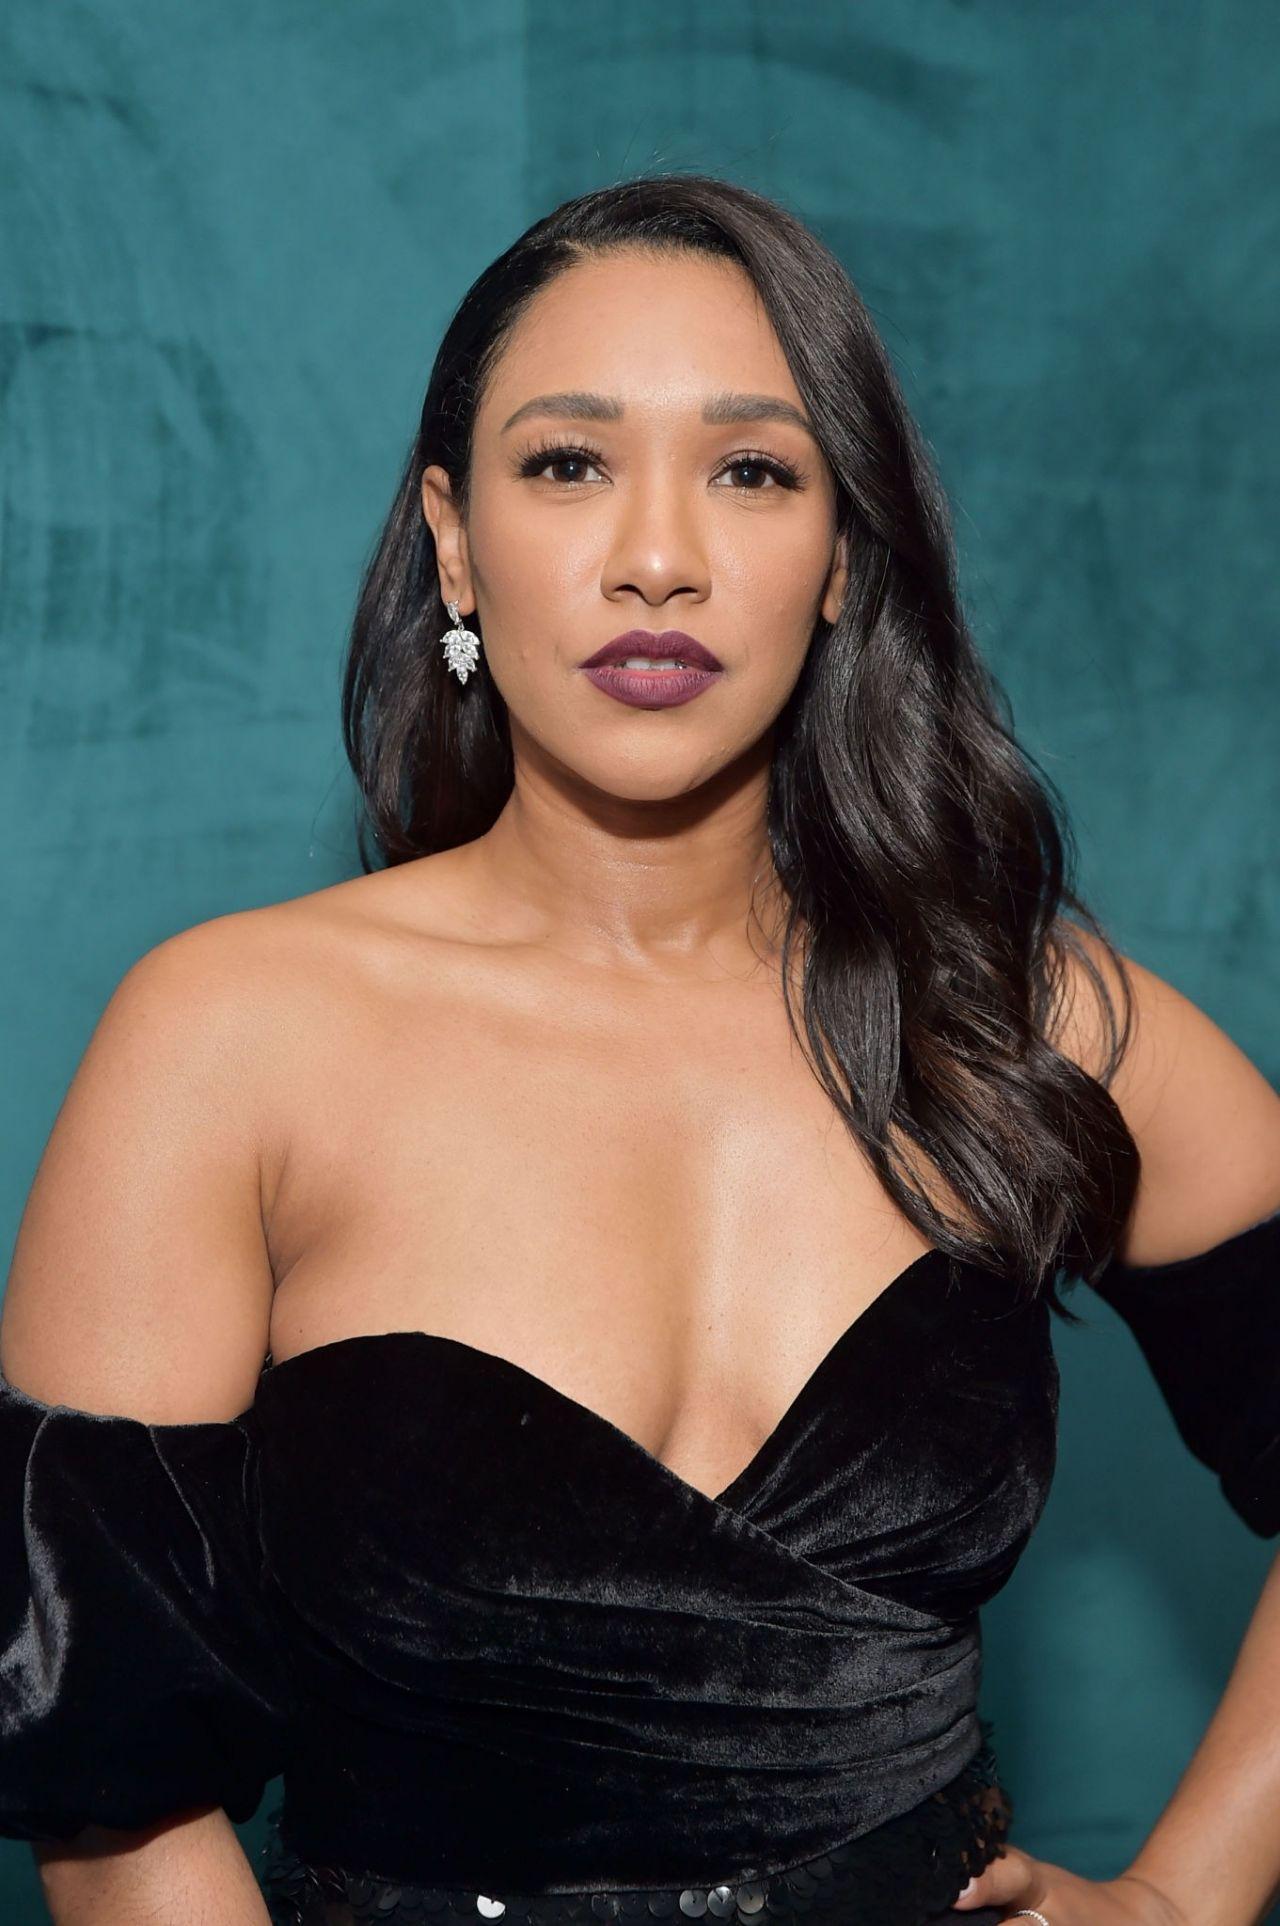 70+ Hot Pictures Of Candice Patton Who Plays Iris West In Flash TV Series 207